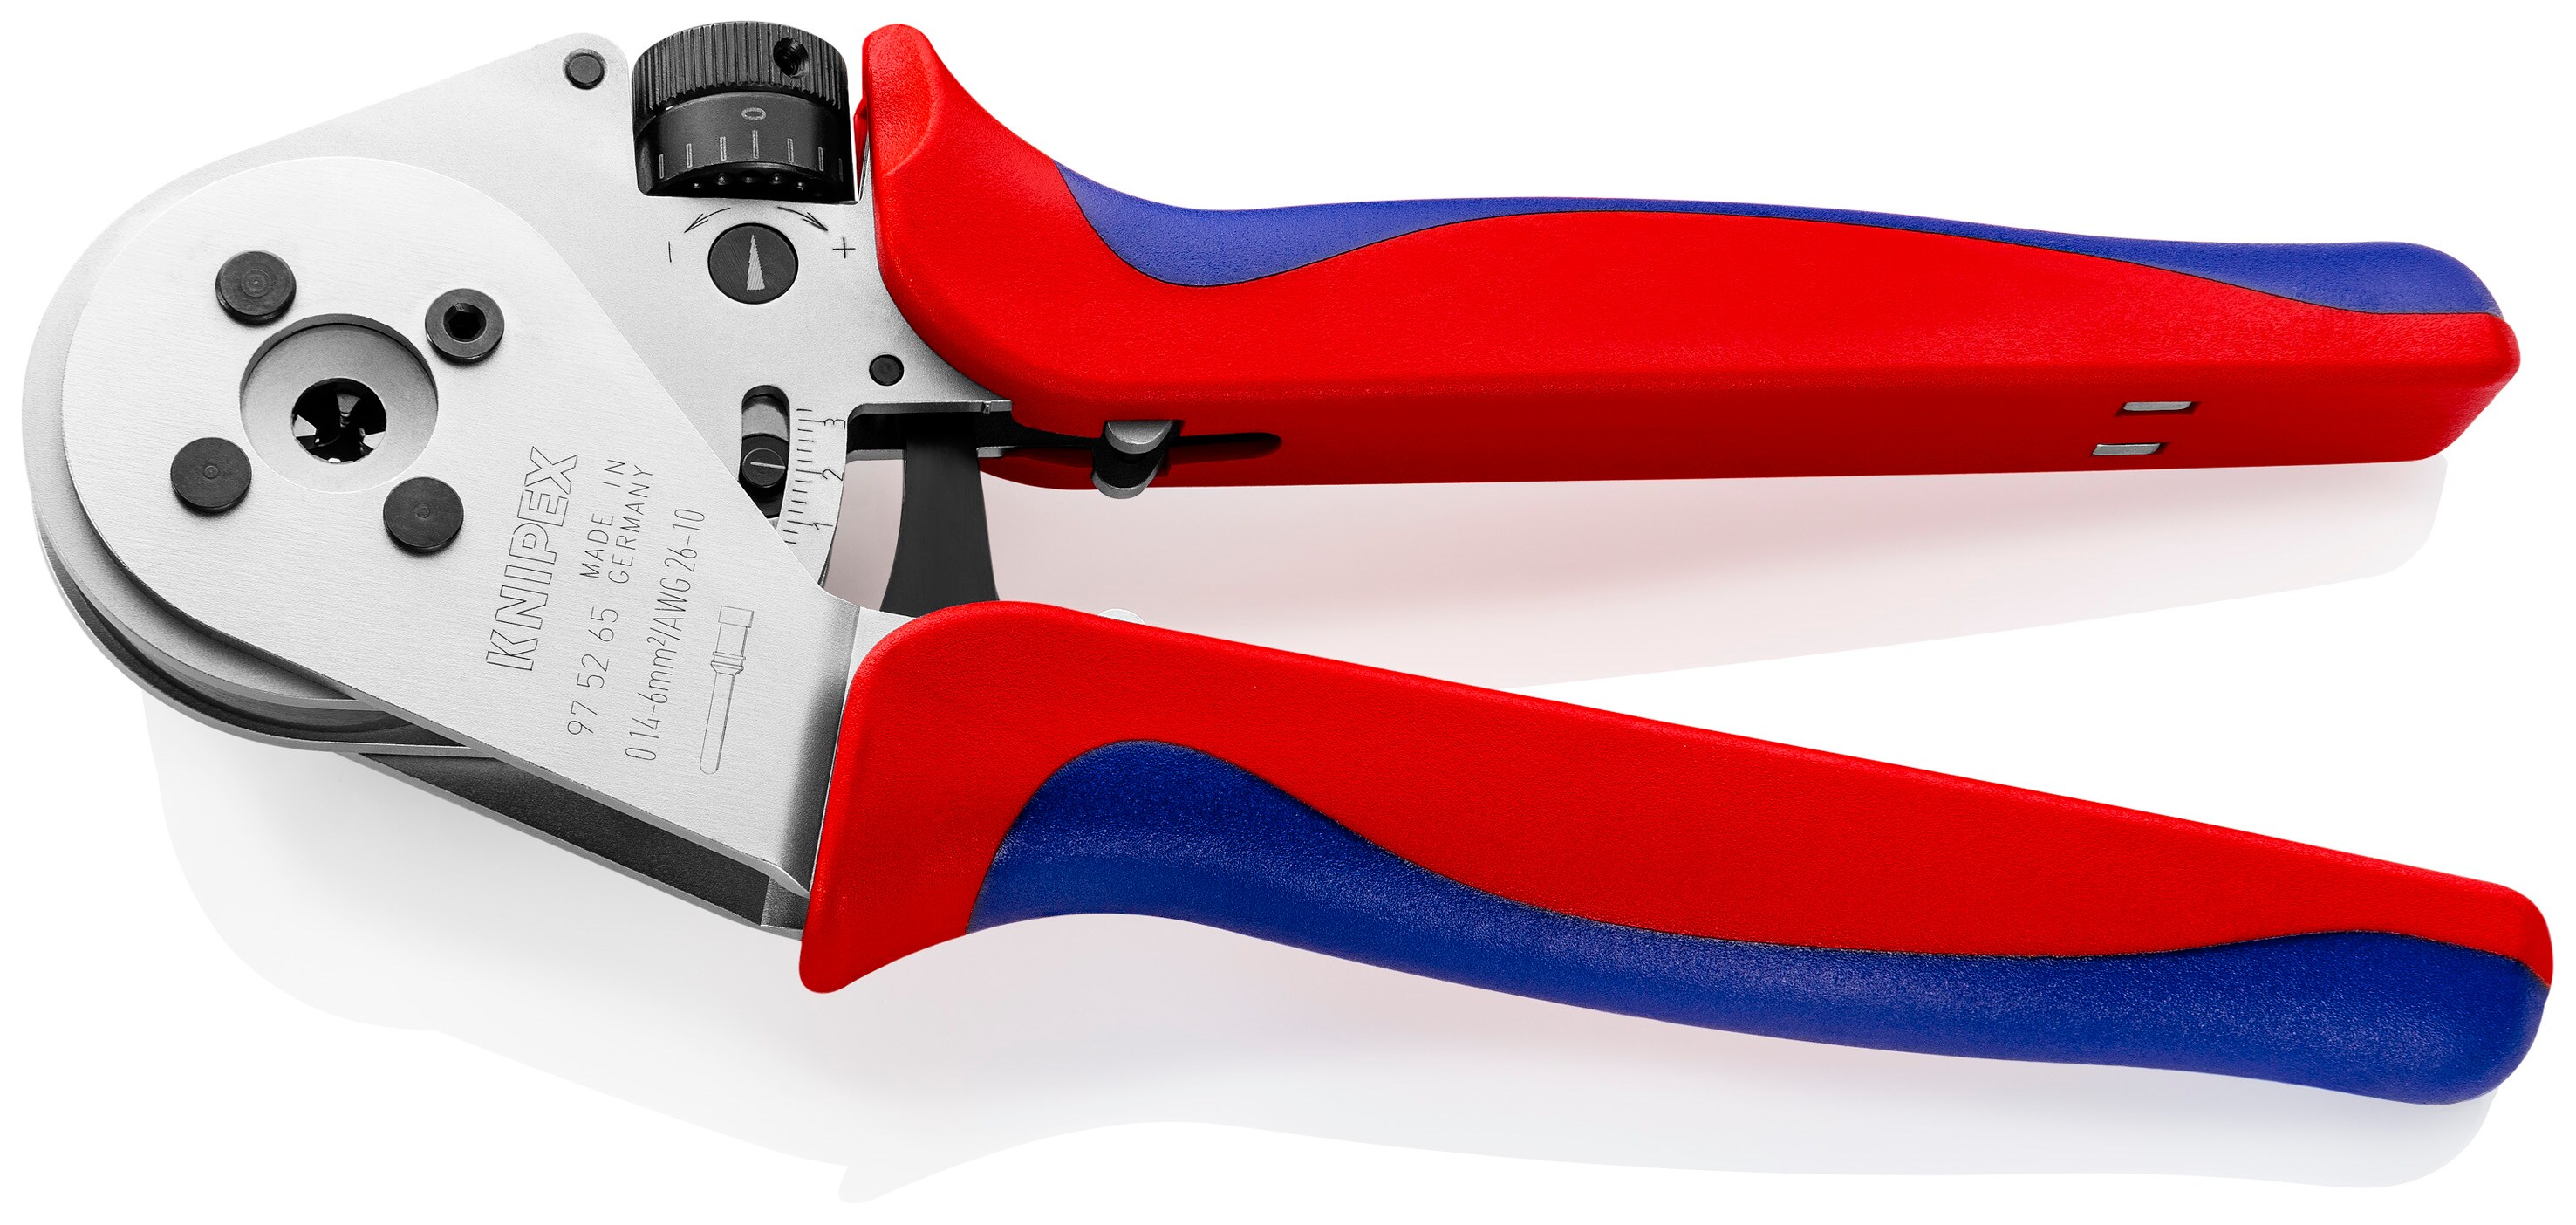 Now with crimping function – the tough KNIPEX